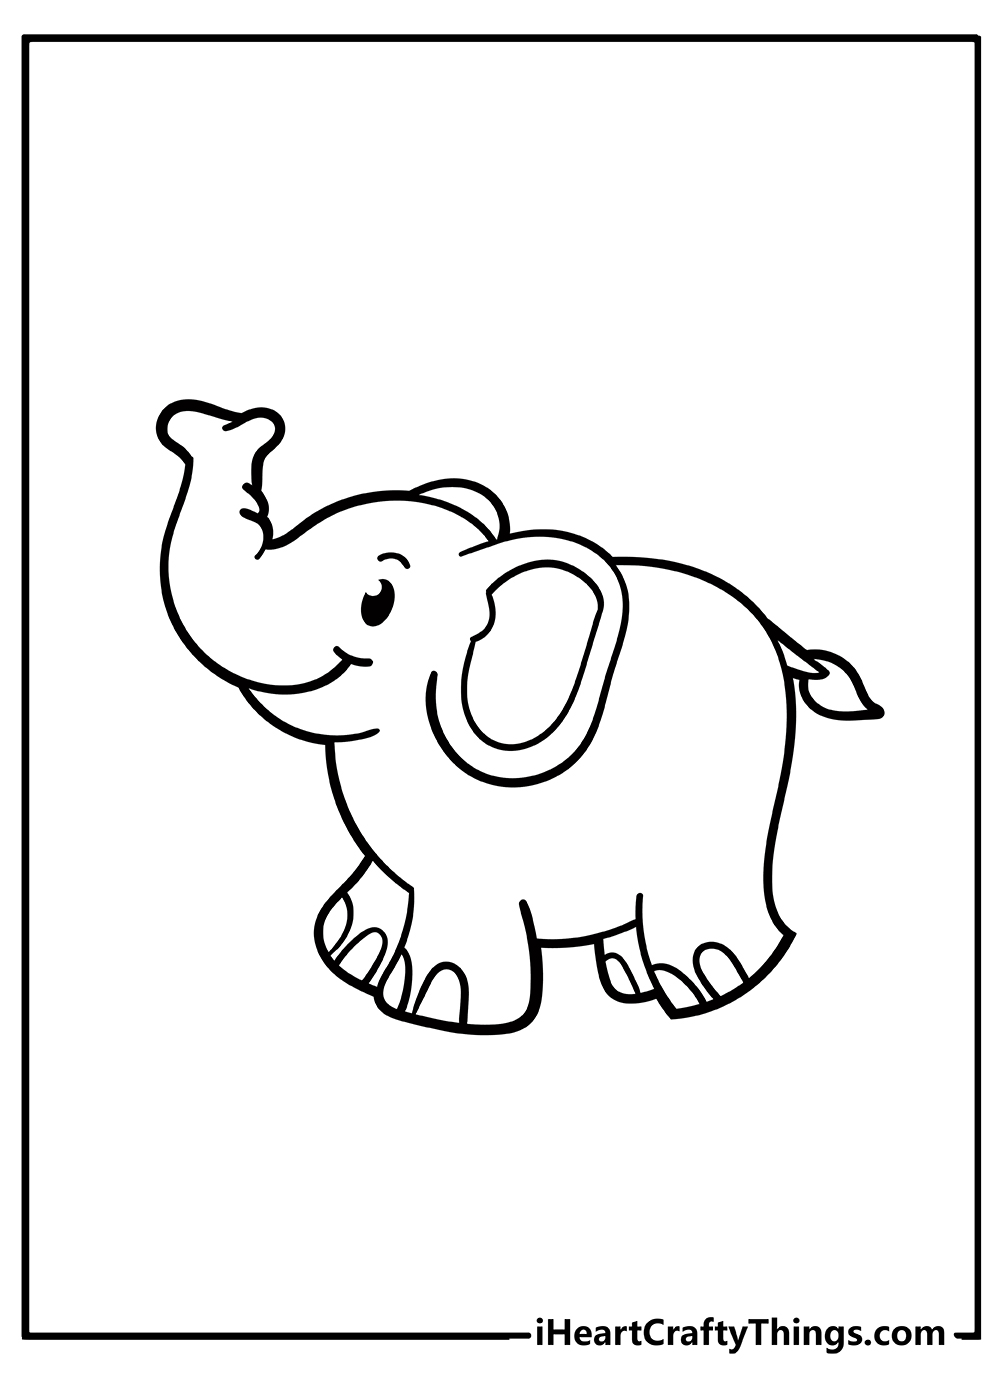 Elephant Easy Coloring Pages 